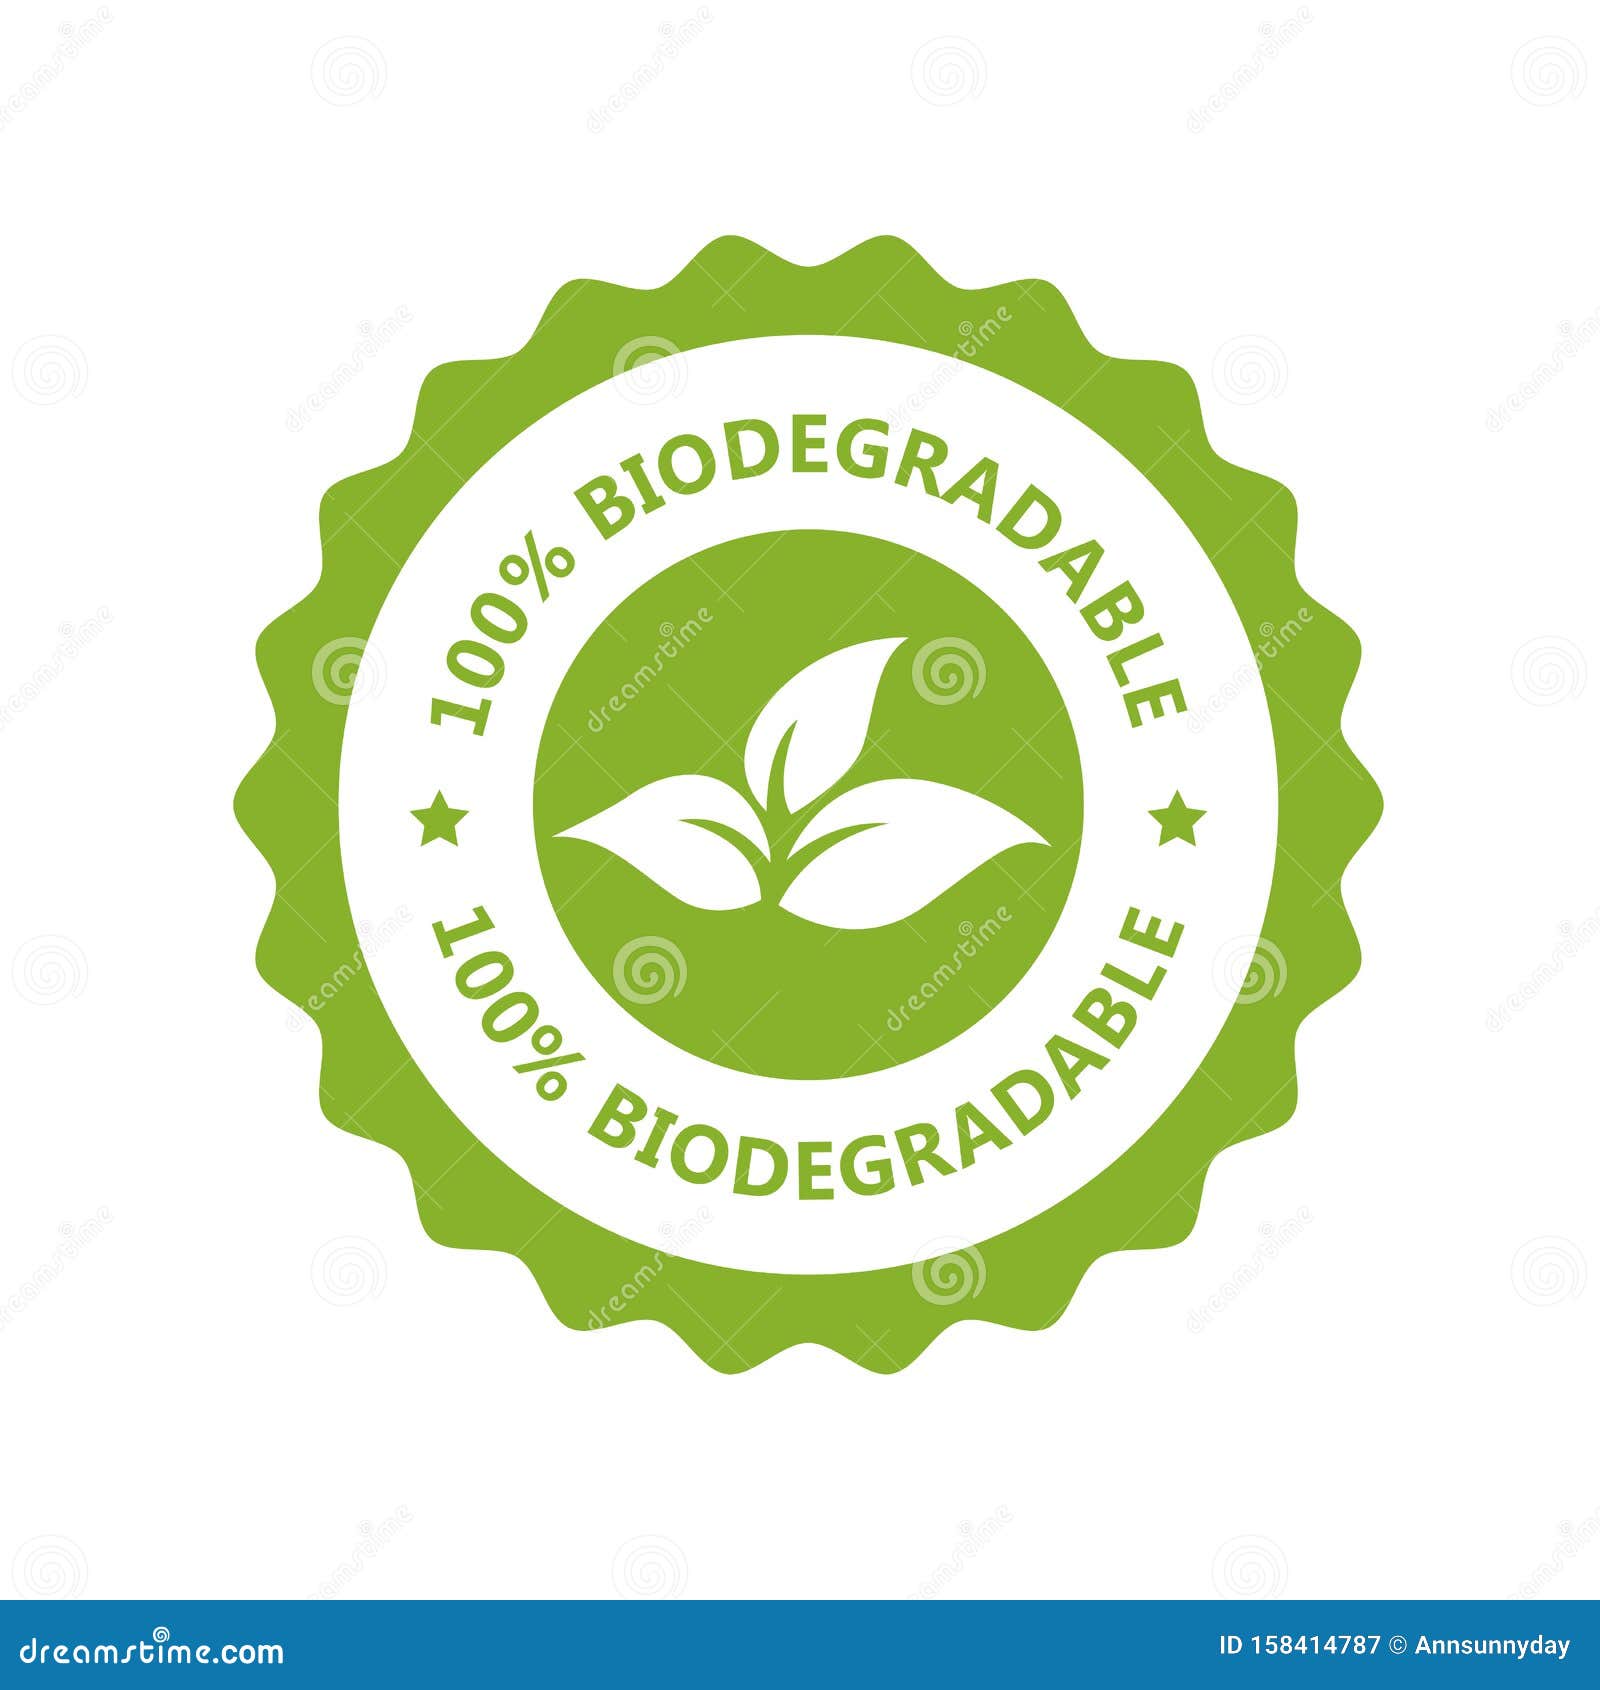 biodegradable, plastic free icon - compostable product label